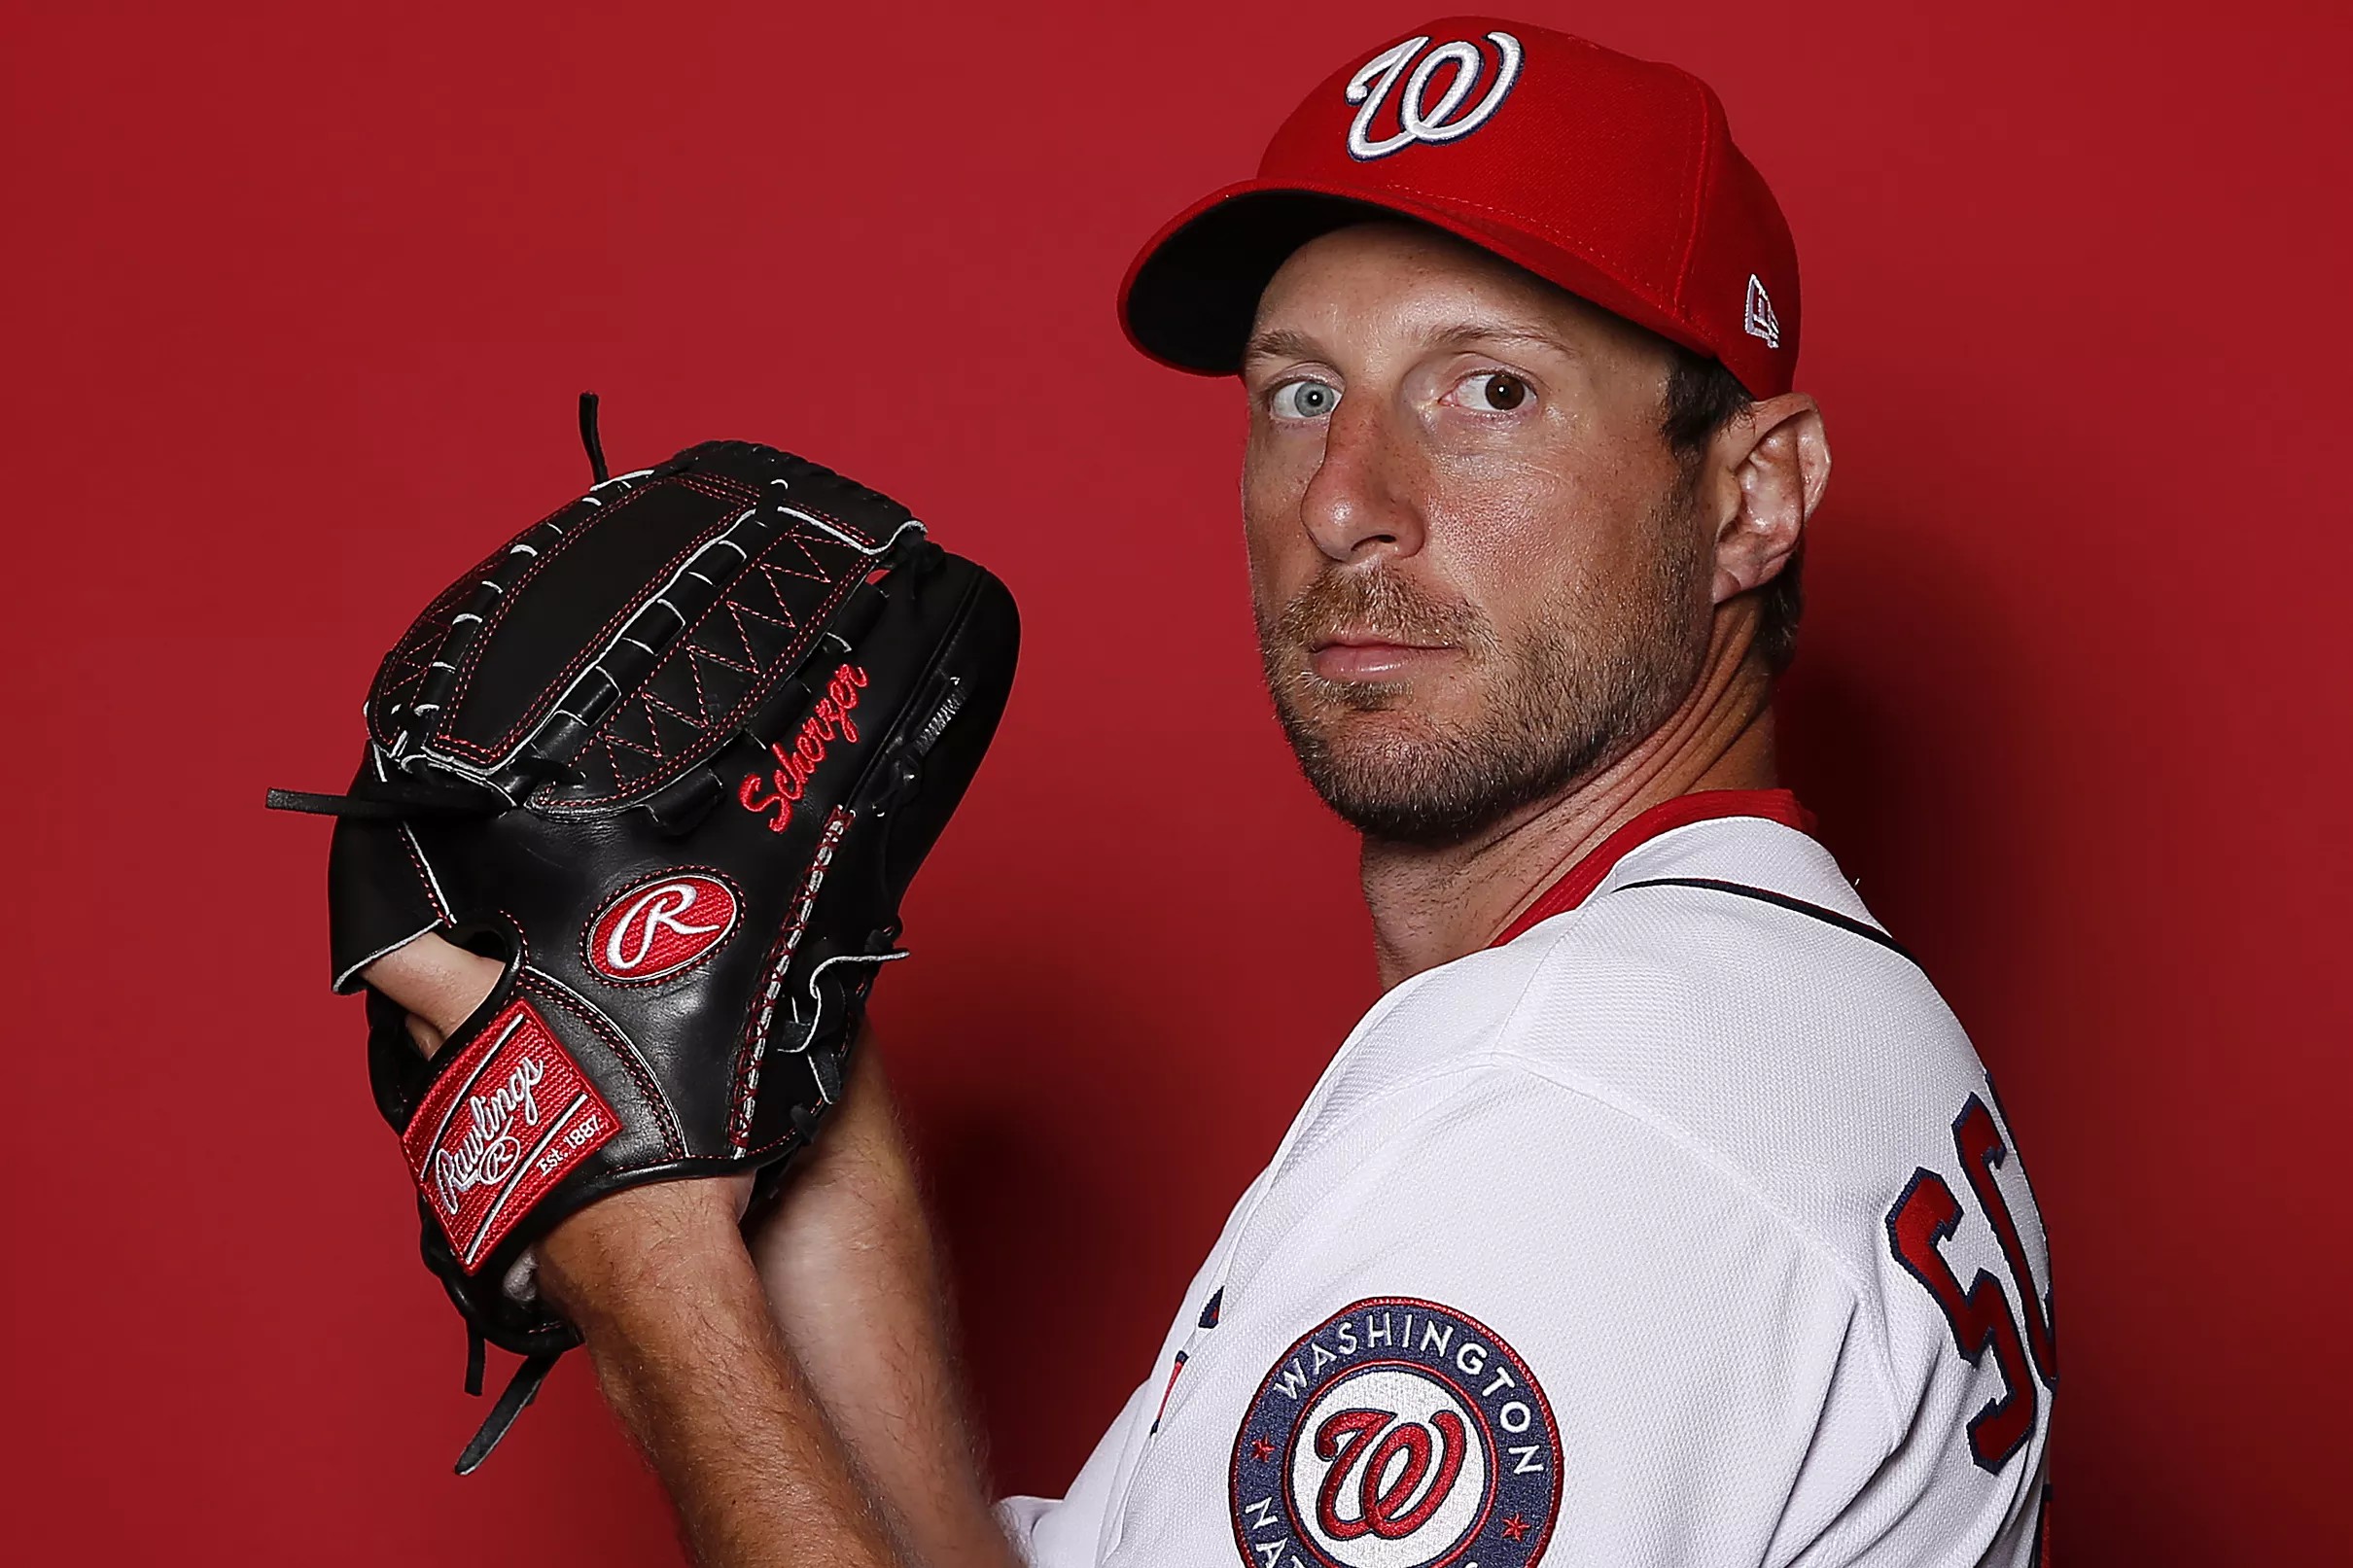 Washington Nationals send Max Scherzer out on Opening Day again...